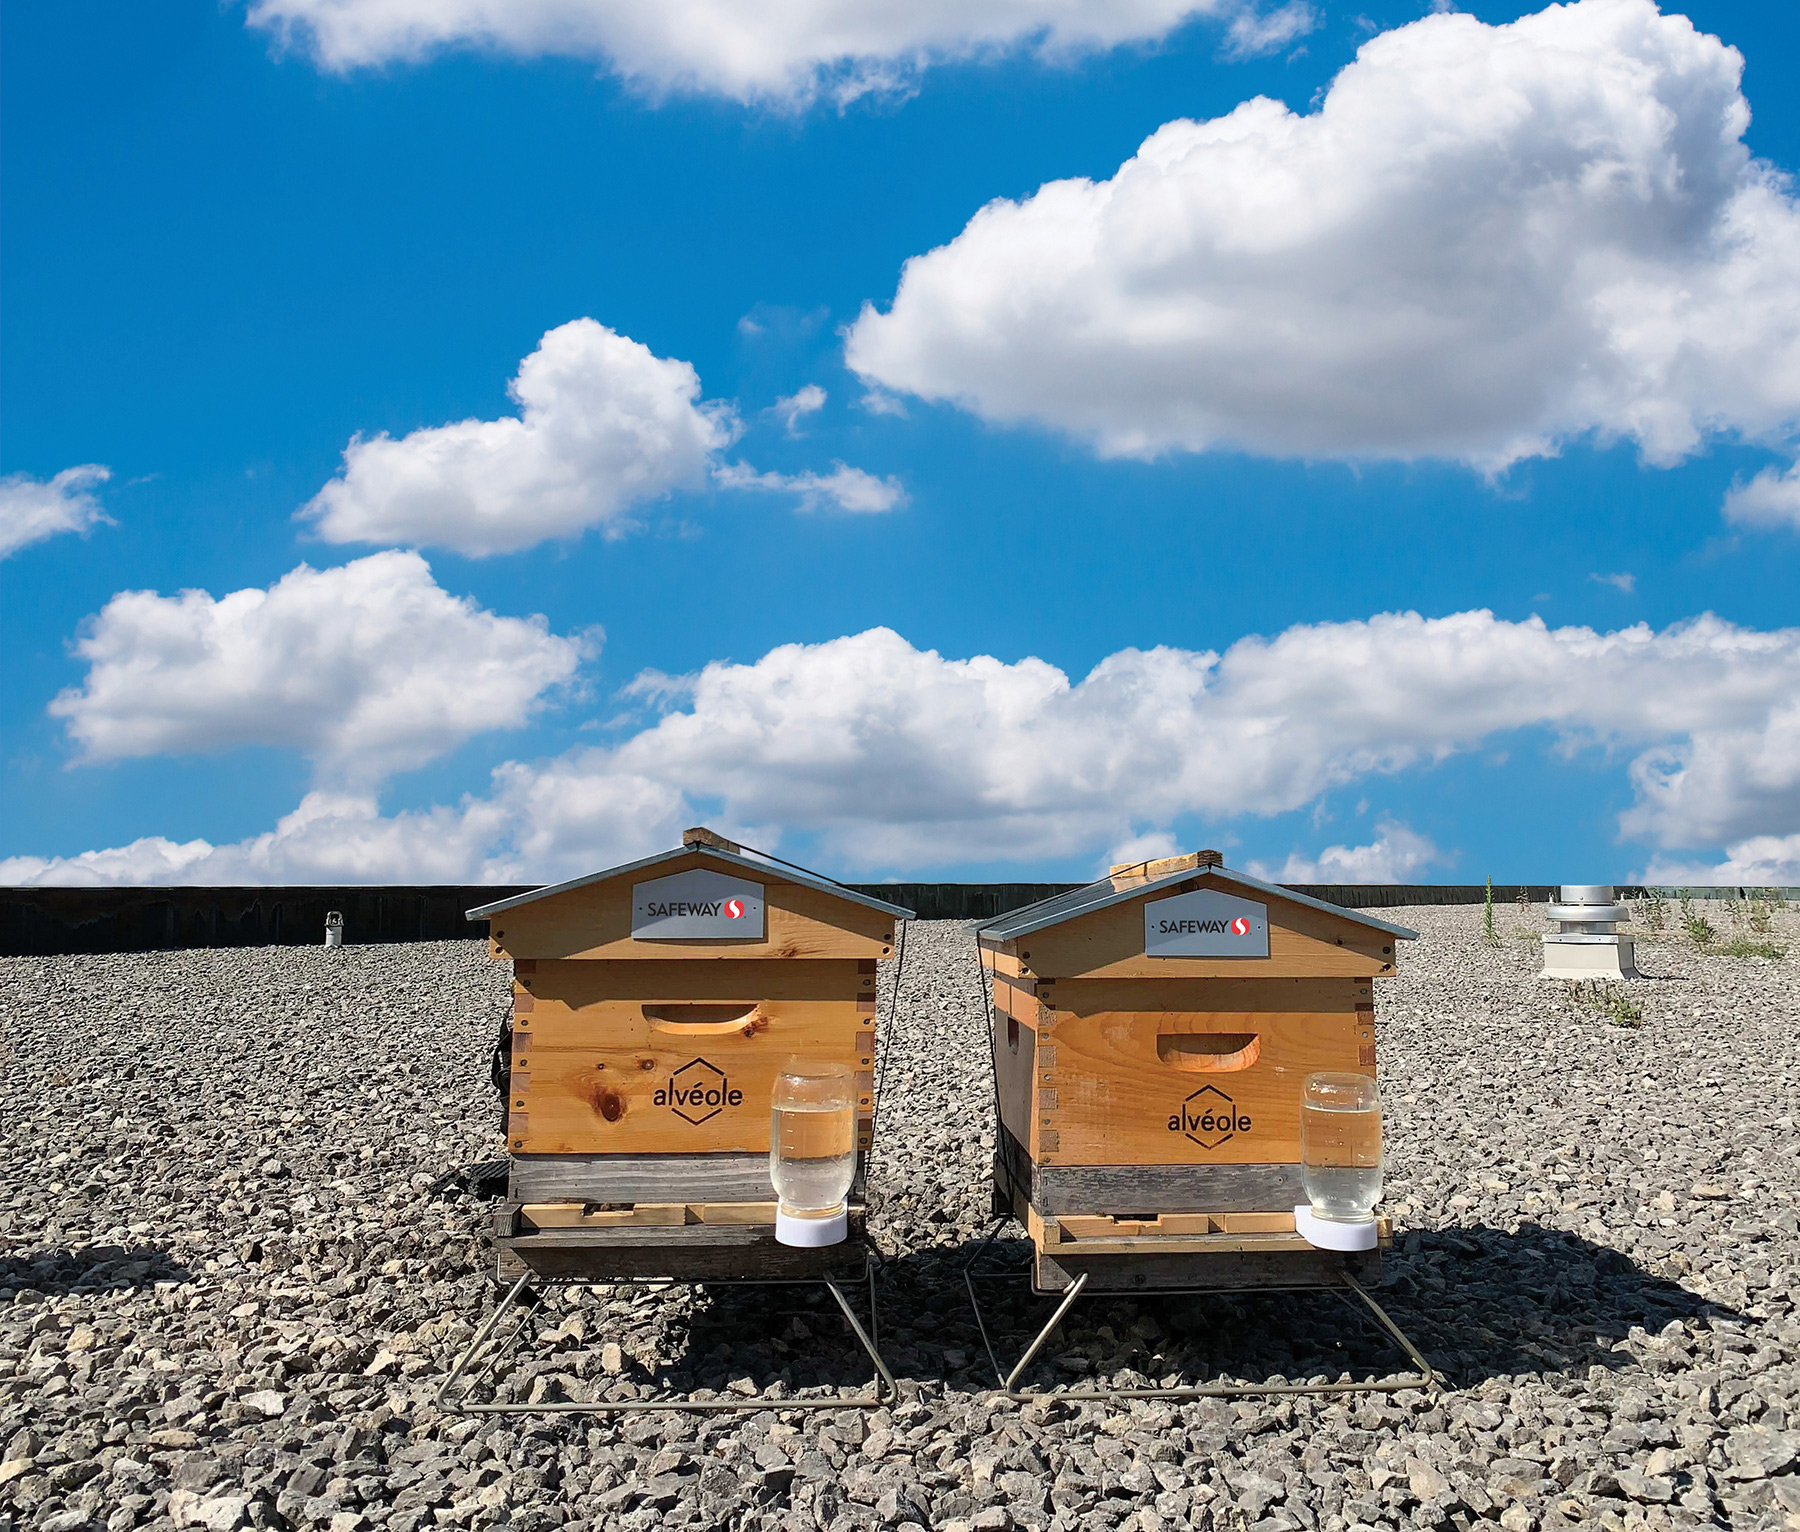 Sobeys and Alvéole are beekeeping in the city with two beehives side-by-side in a towering city centre on a sunny day.